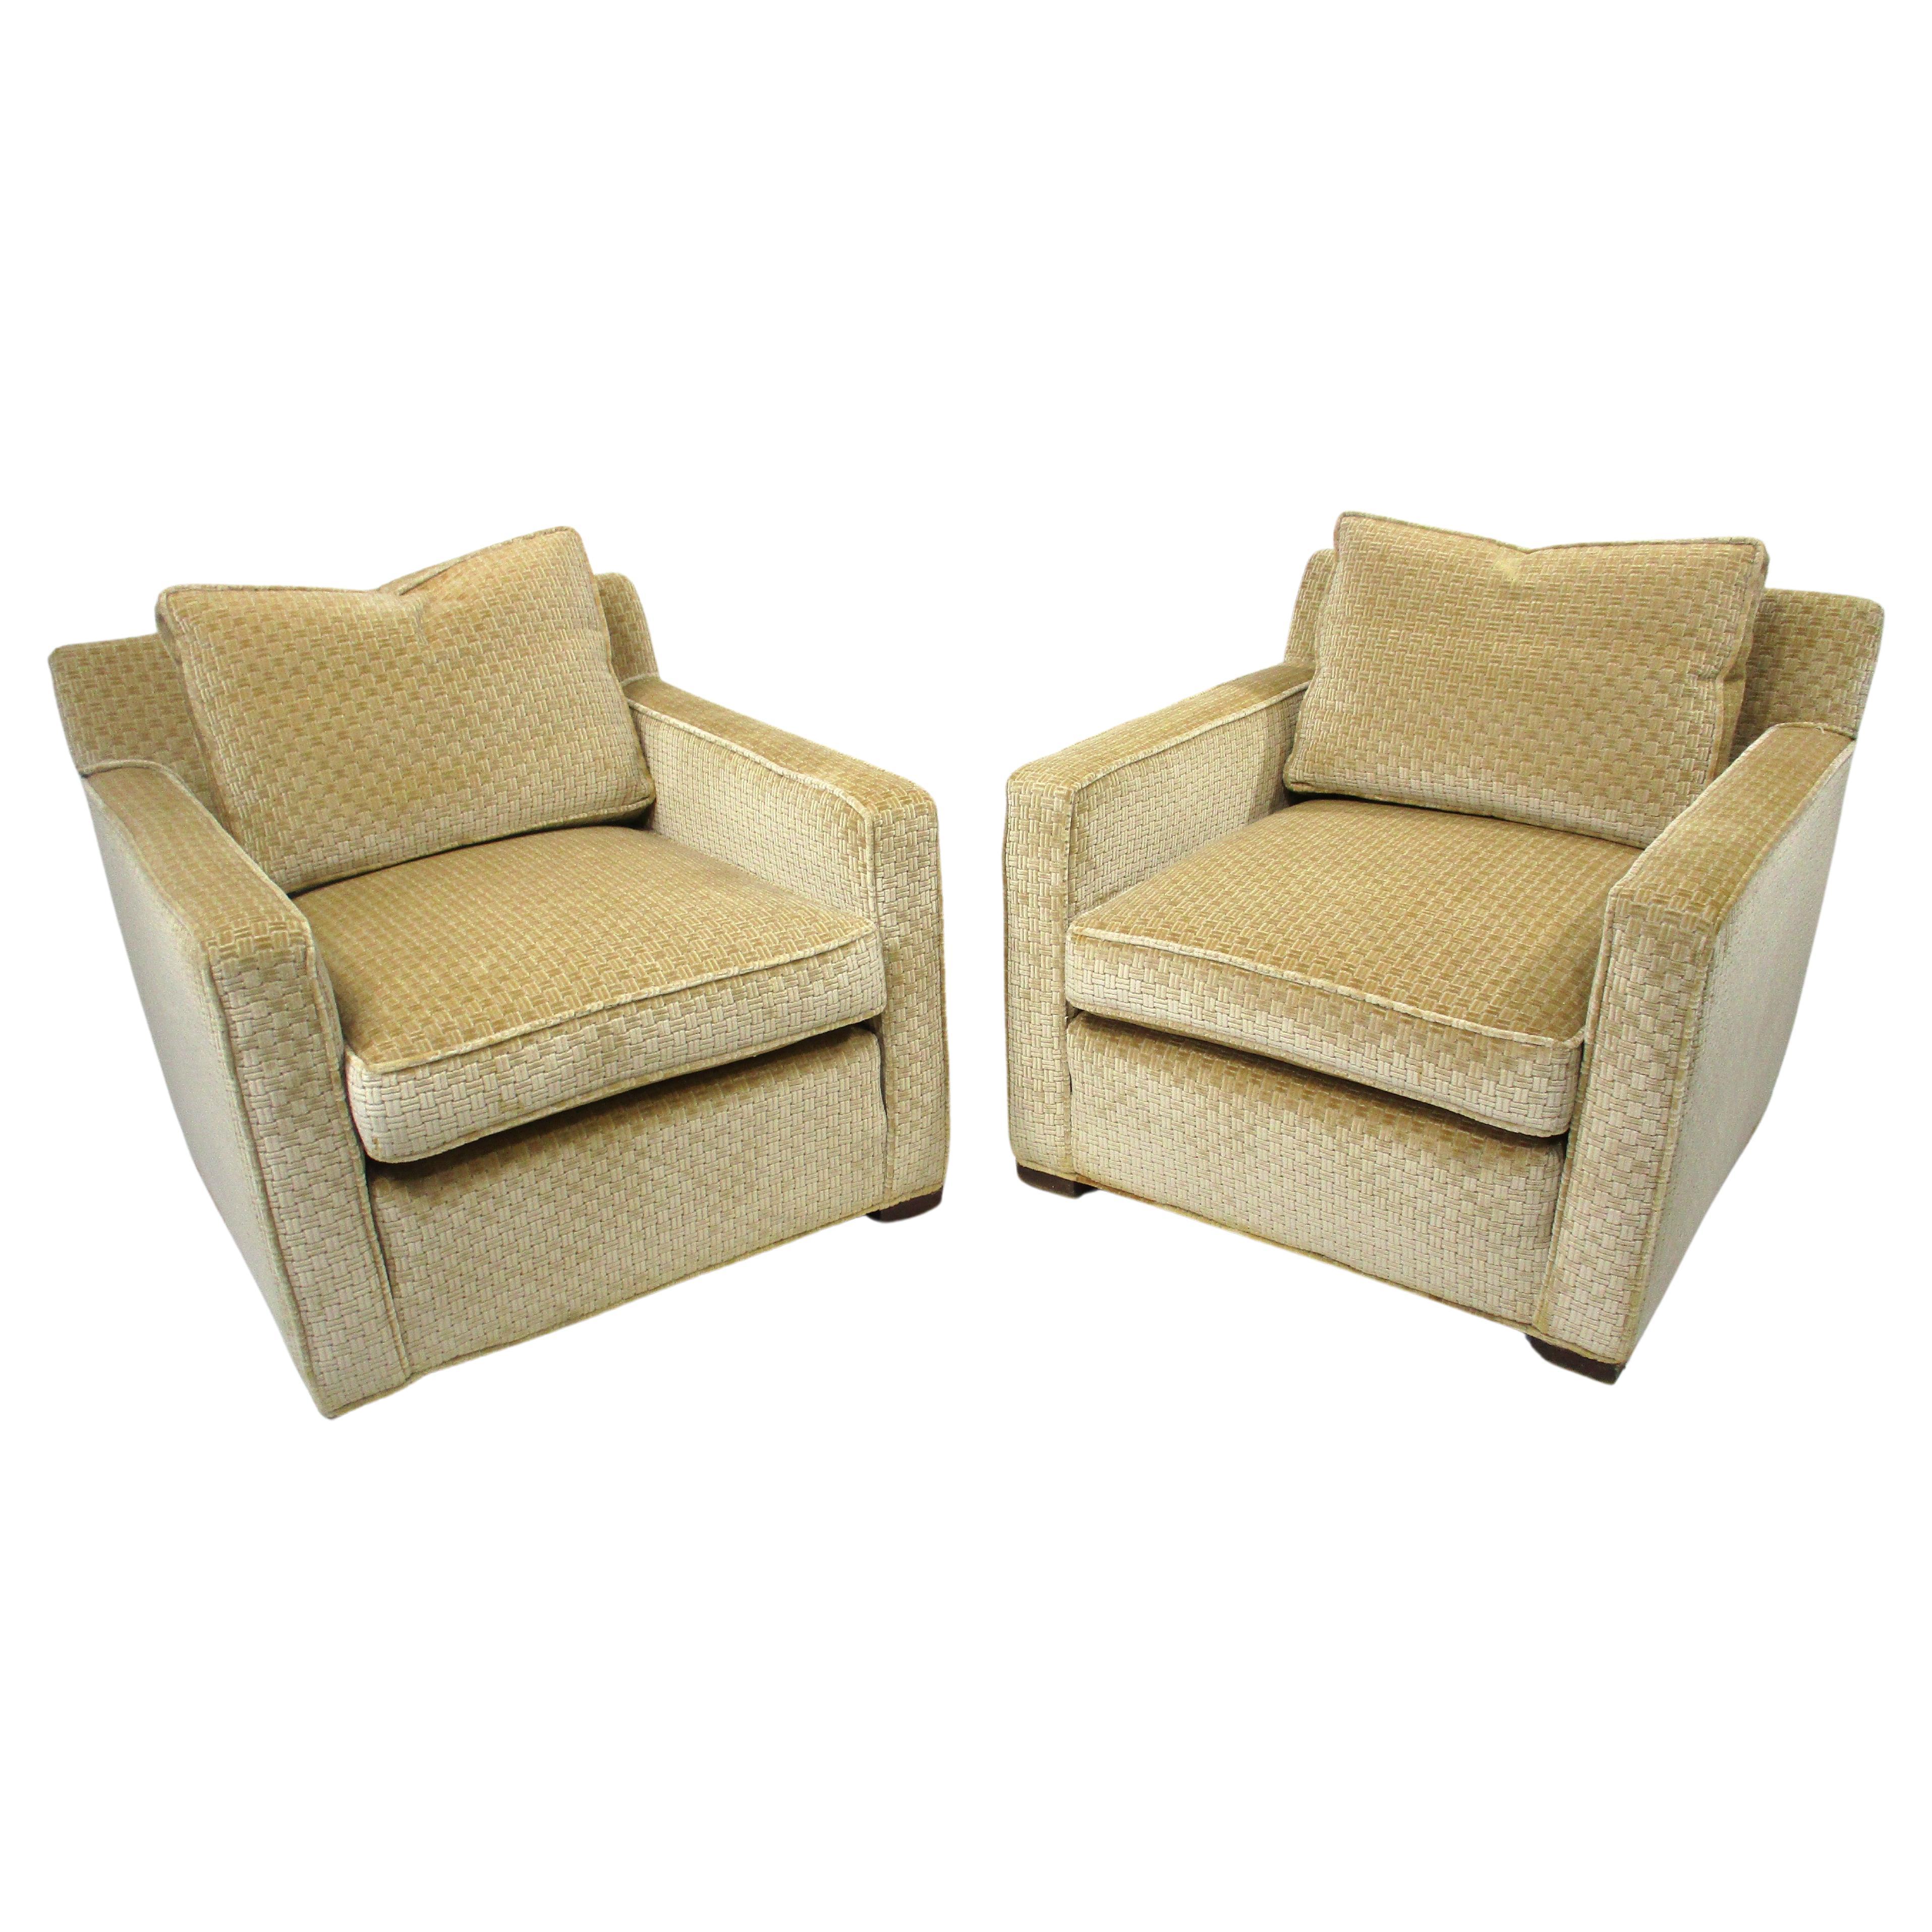 A pair of wonderfully comfortable and supportive club chairs in a soft medium beige colored cross hatched patterned fabric . Very well crafted and sturdy with loose cushions and springs to the bottom of the chairs in the manner of Dunbar . Designed